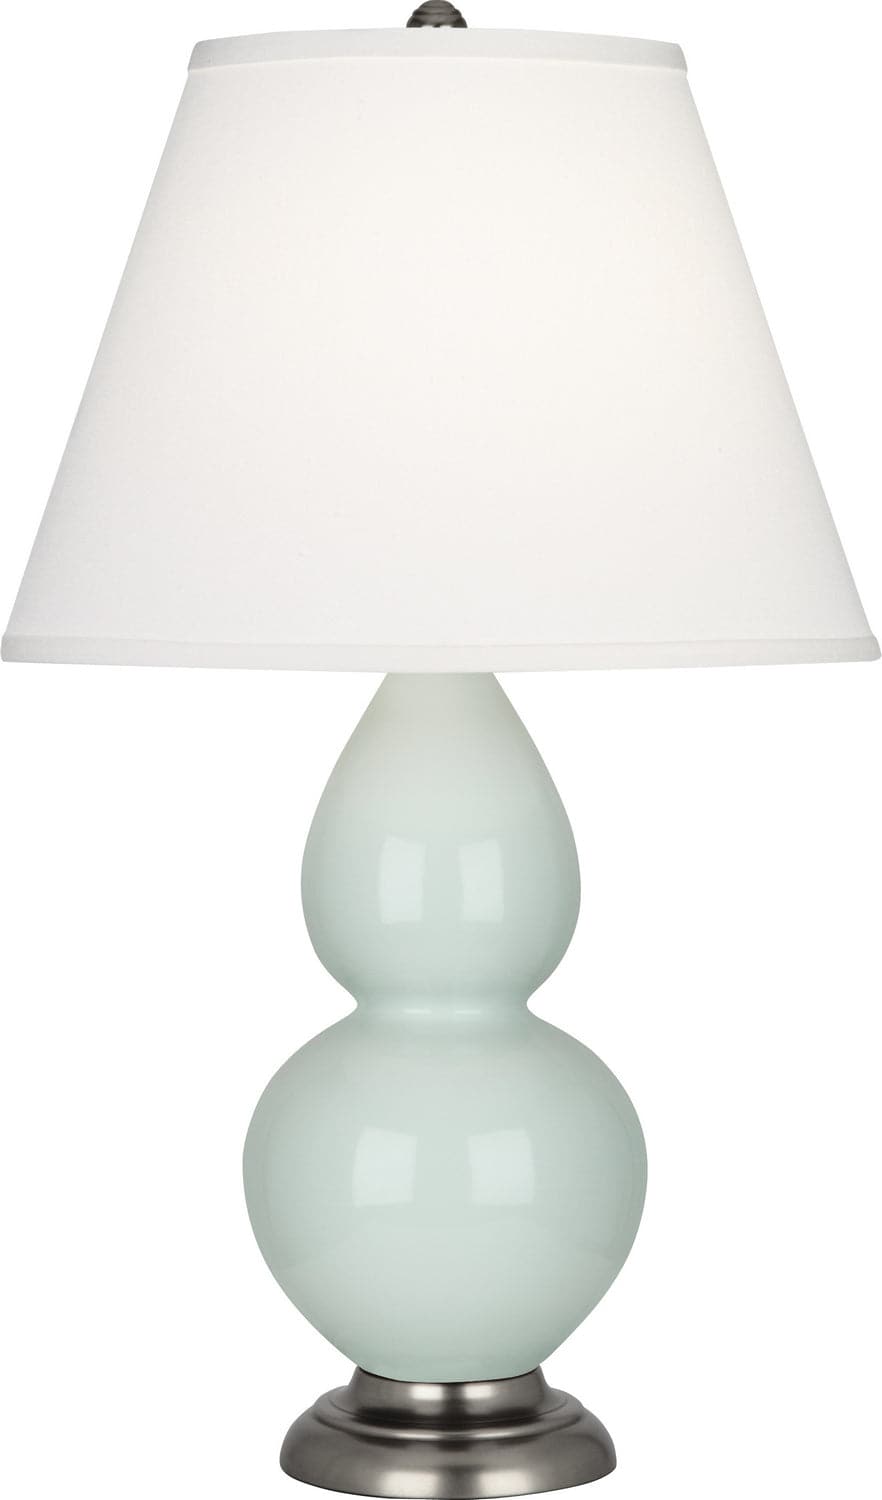 Robert Abbey - 1788X - One Light Accent Lamp - Small Double Gourd - Celadon Glazed w/Antique Silver